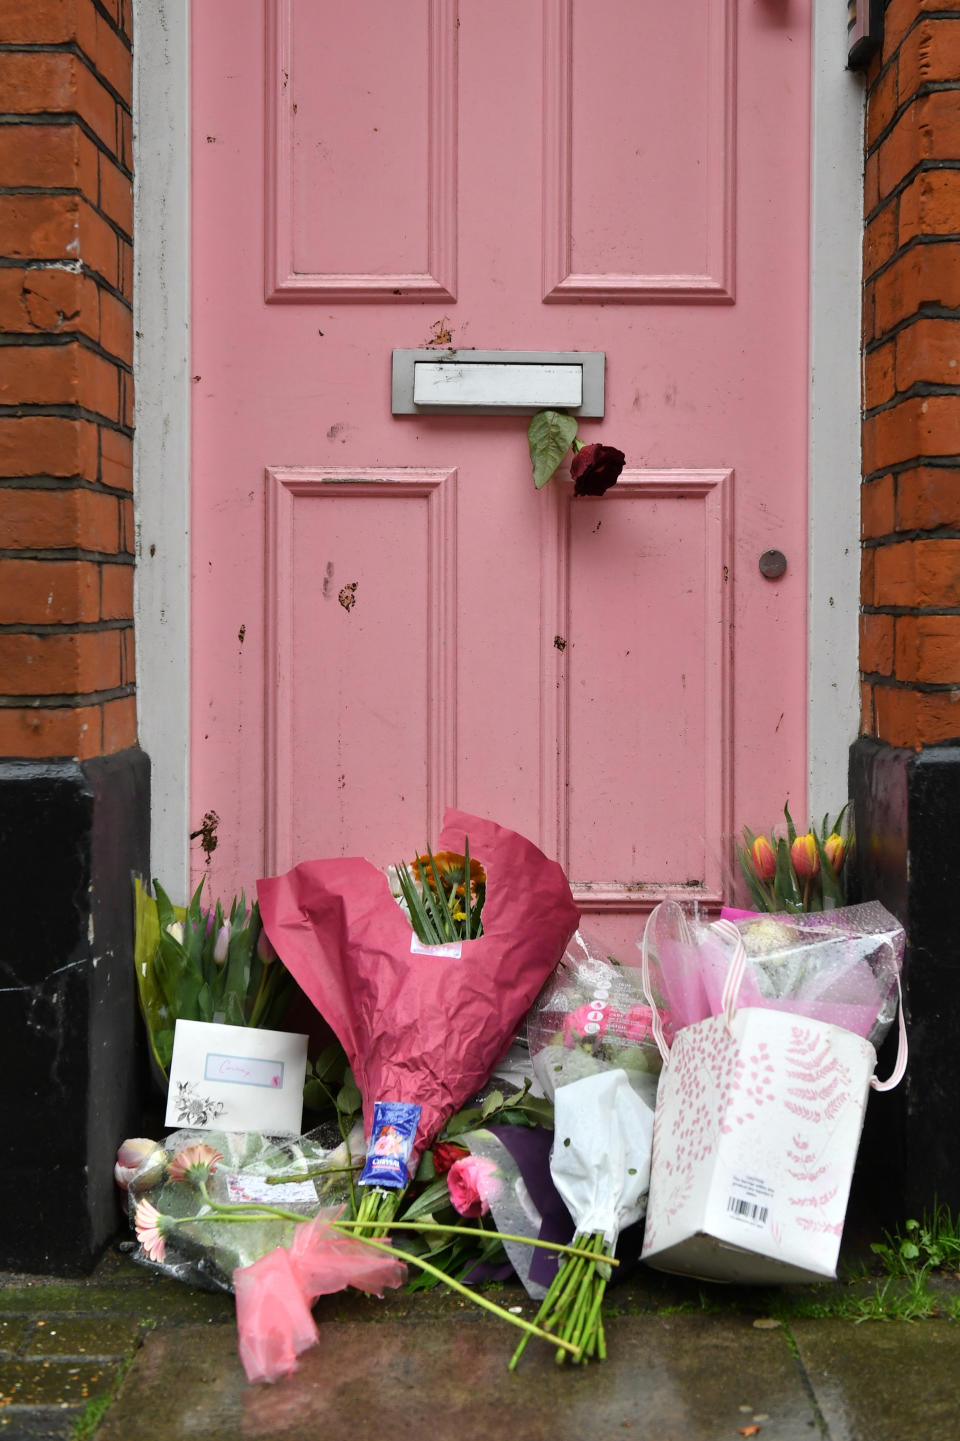 Floral tributes placed outside Caroline Flack's former home in North London. (Photo by Dominic Lipinski/PA Images via Getty Images)